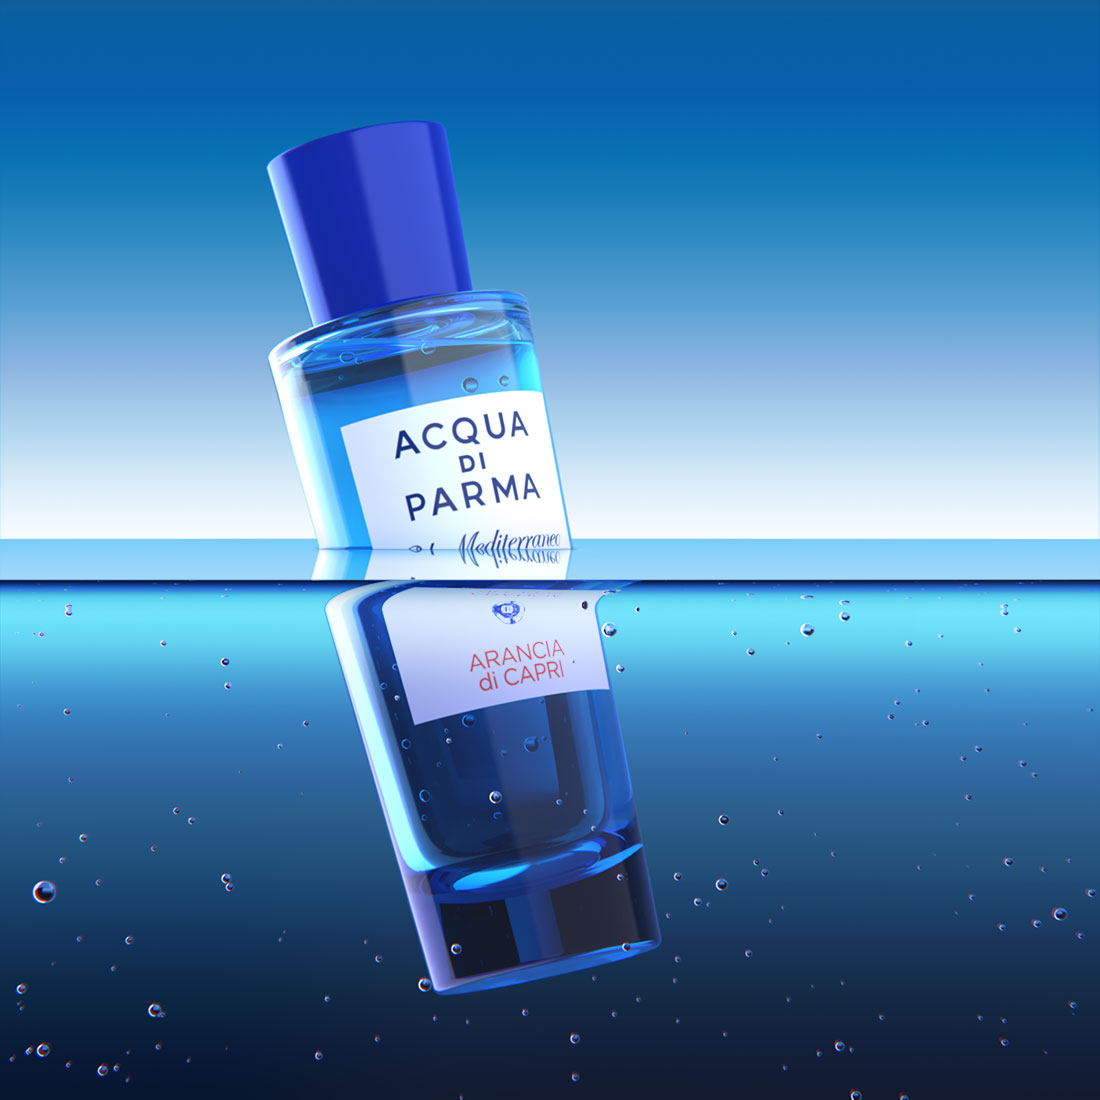 Perfume Advertising Images - CGI Product Images